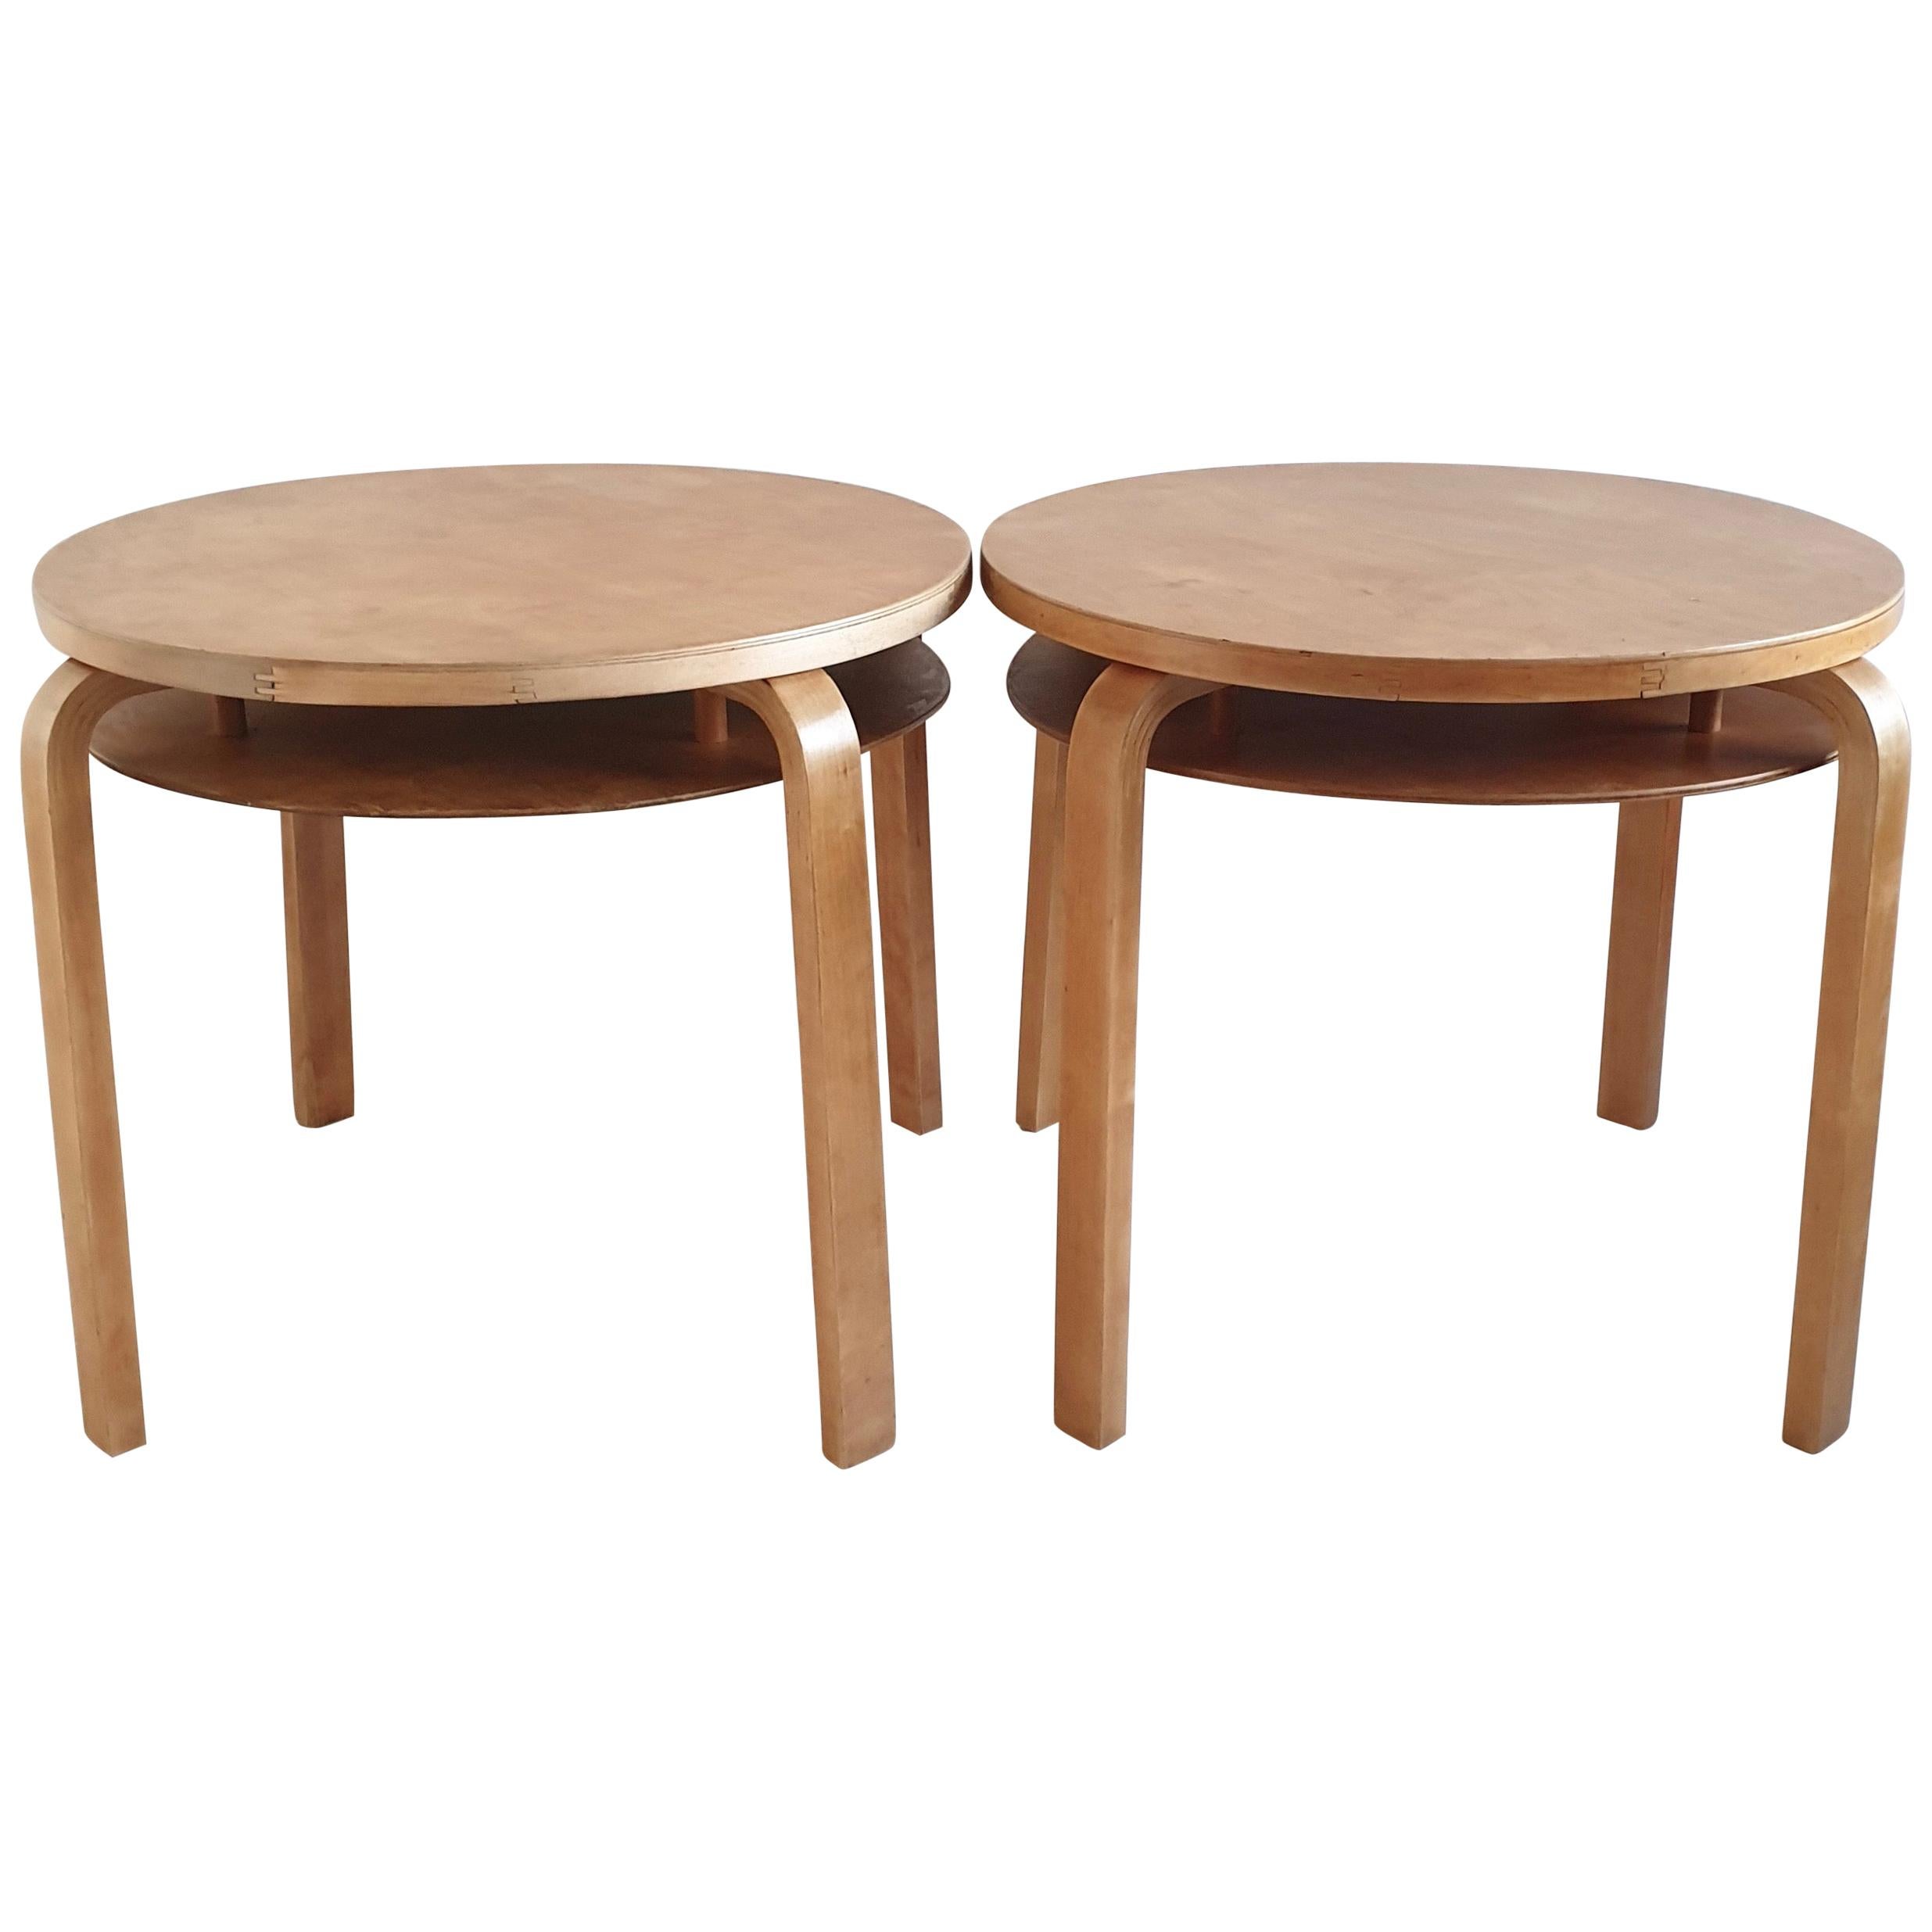 Pair of Rare '907' Stacking Side Tables by Alvar Aalto for Artek, circa 1940 For Sale